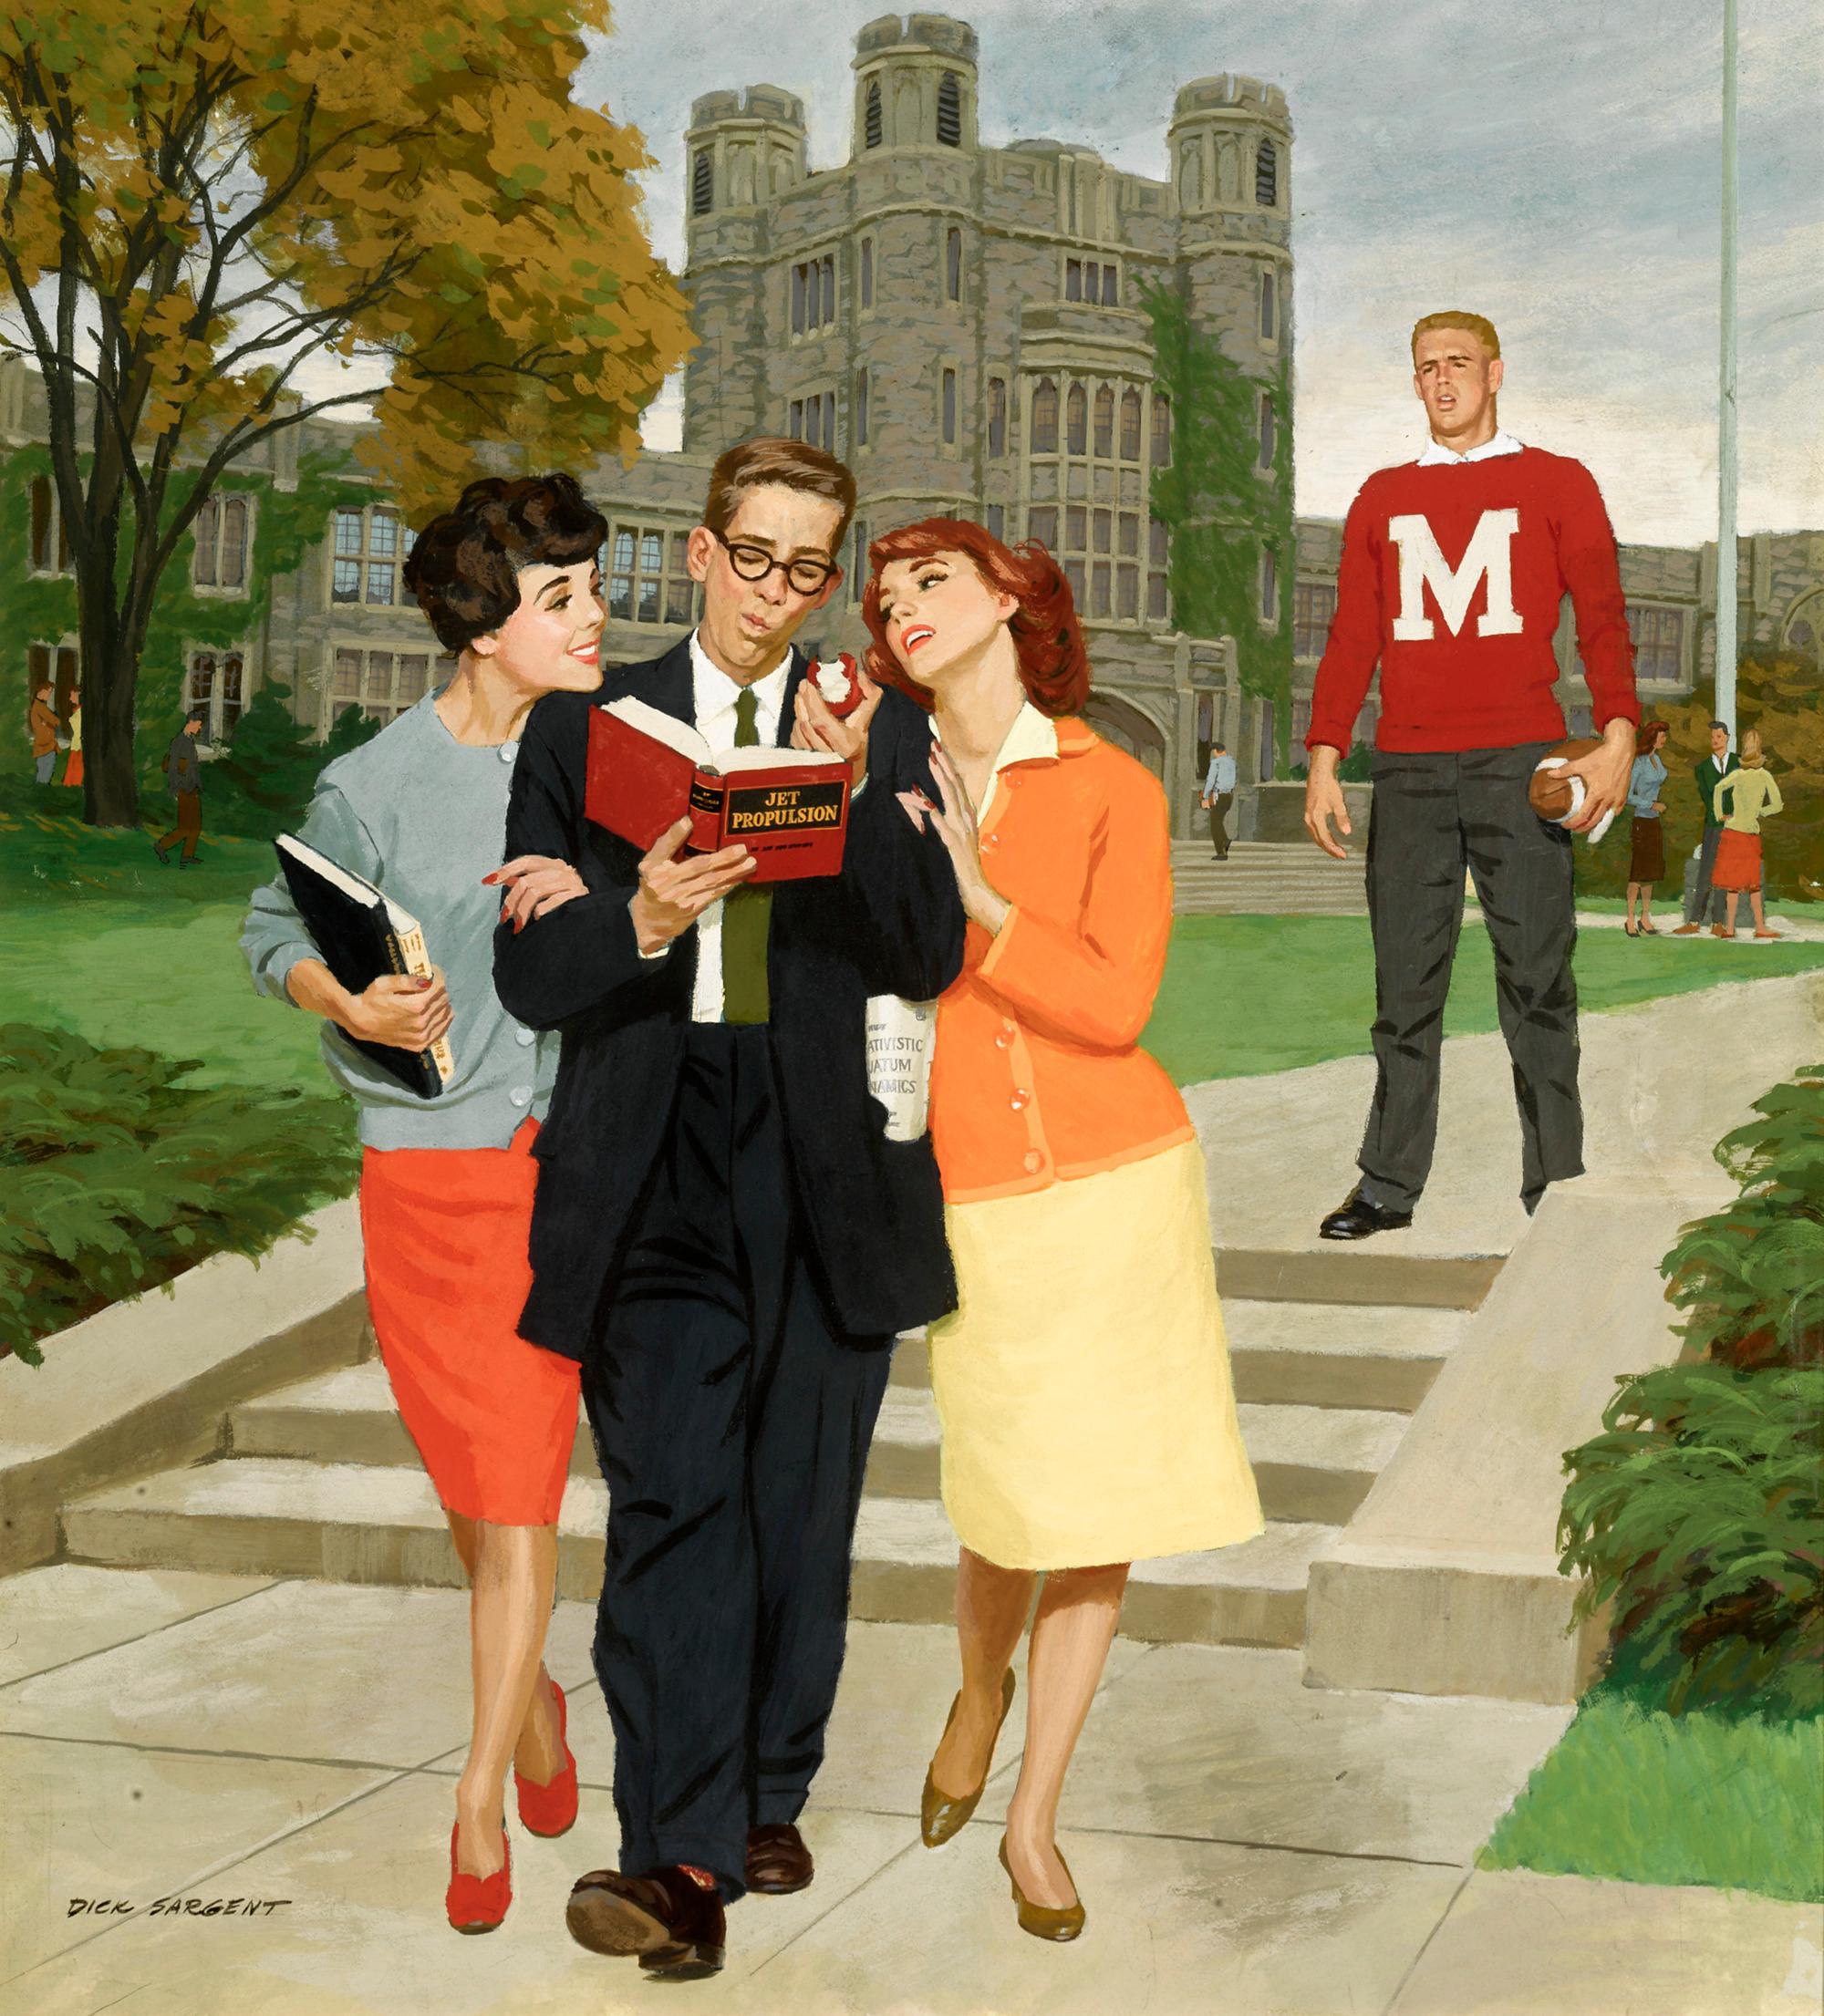 Dick Sargent Figurative Art - Picking Poindexter Saturday Evening Post cover, October 17, 1959